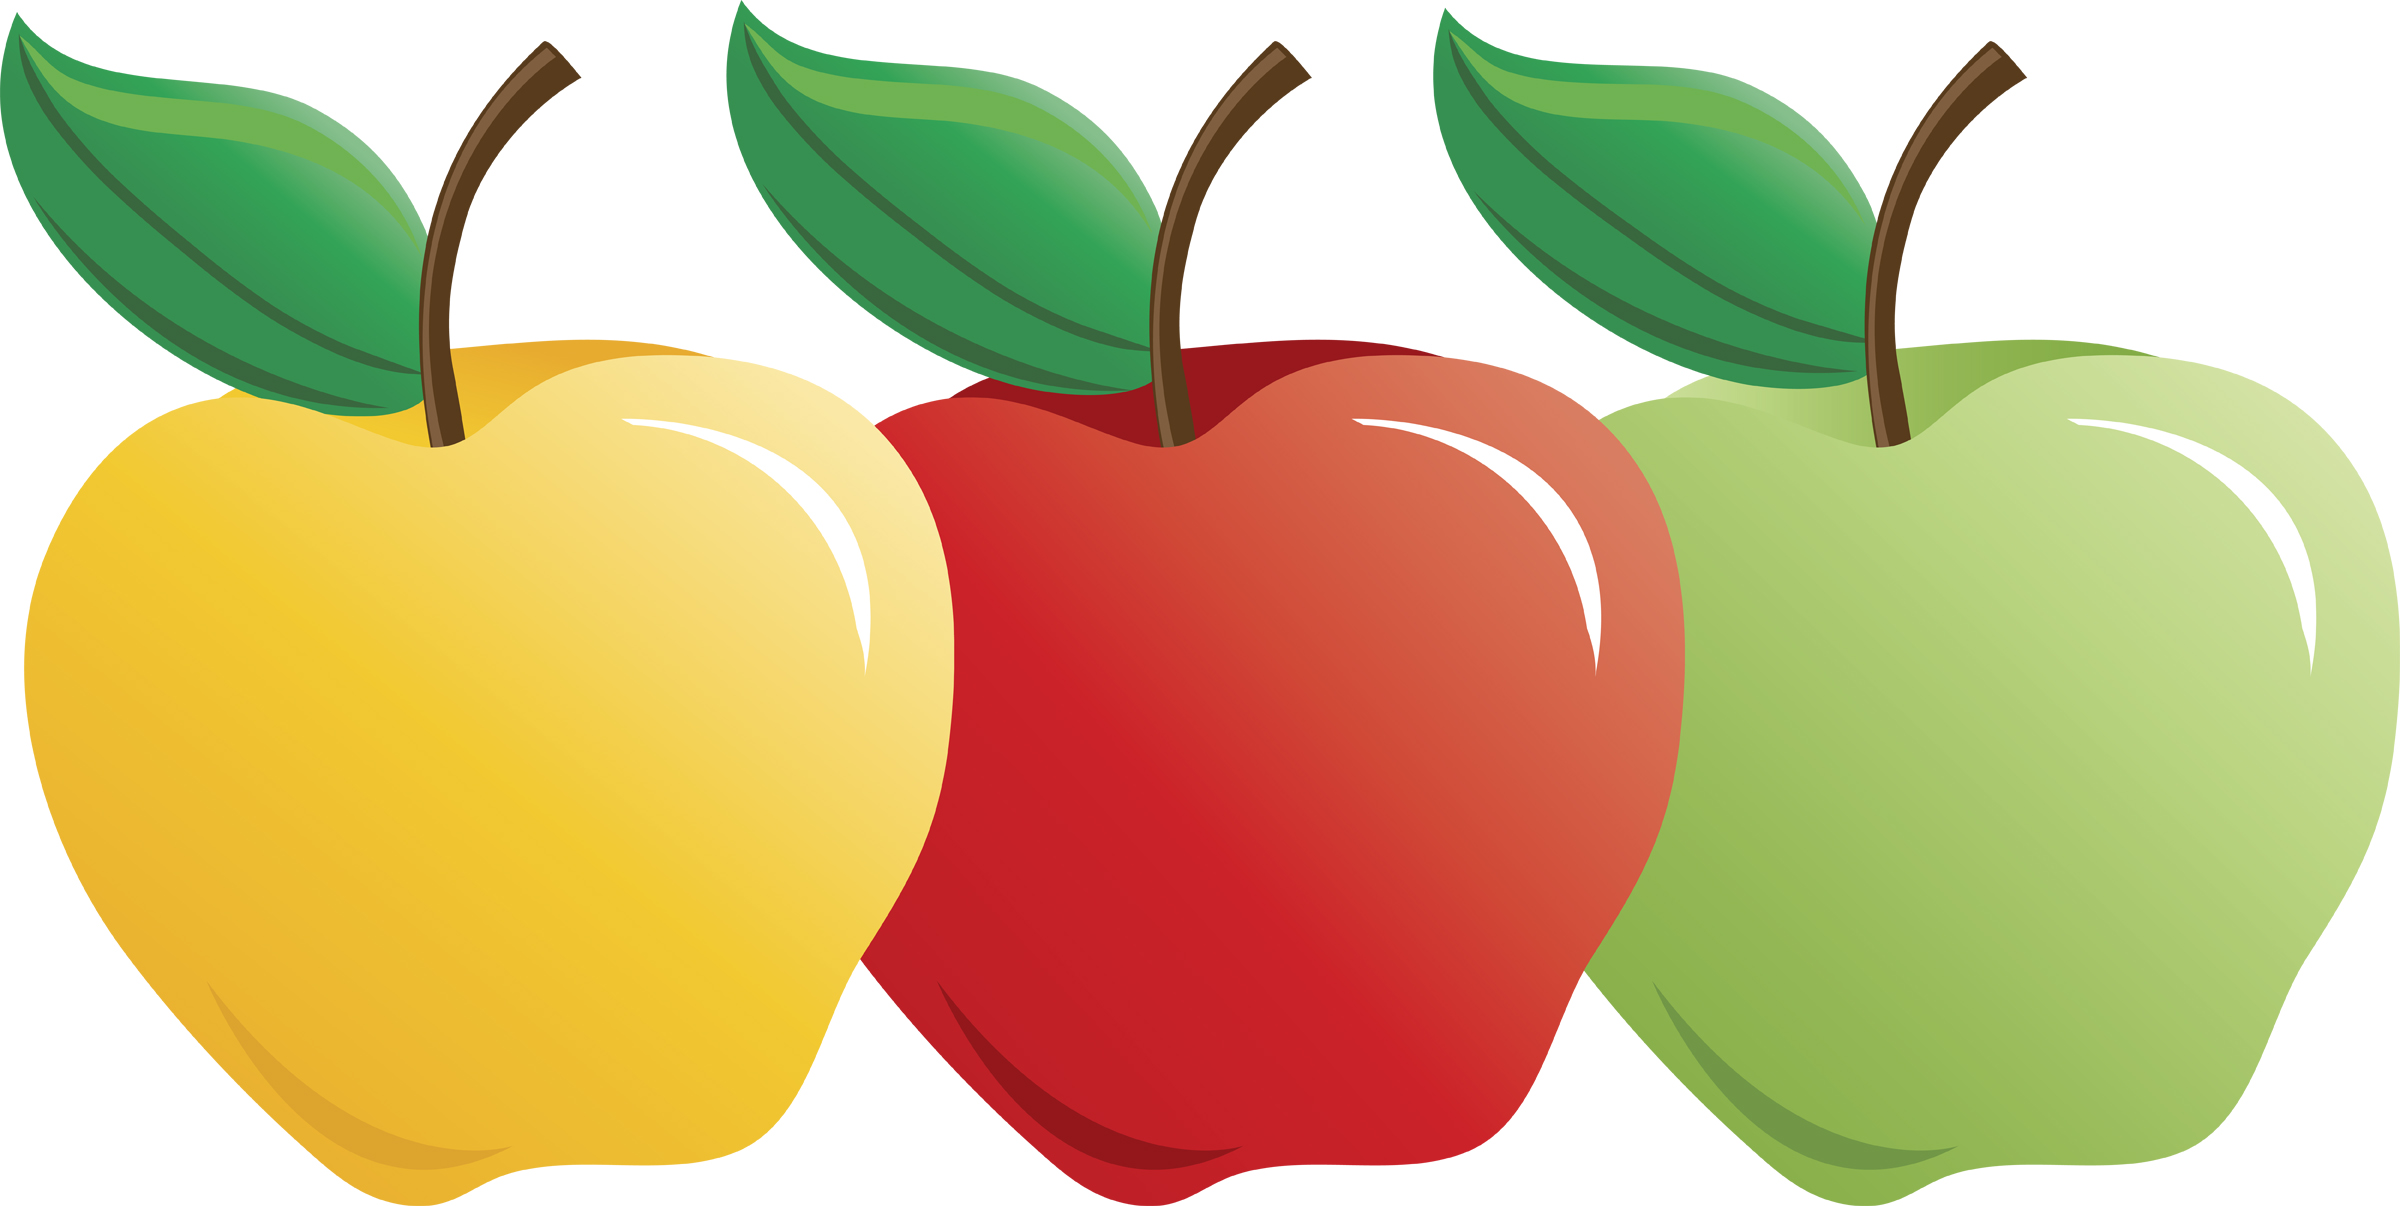 apples clipart free